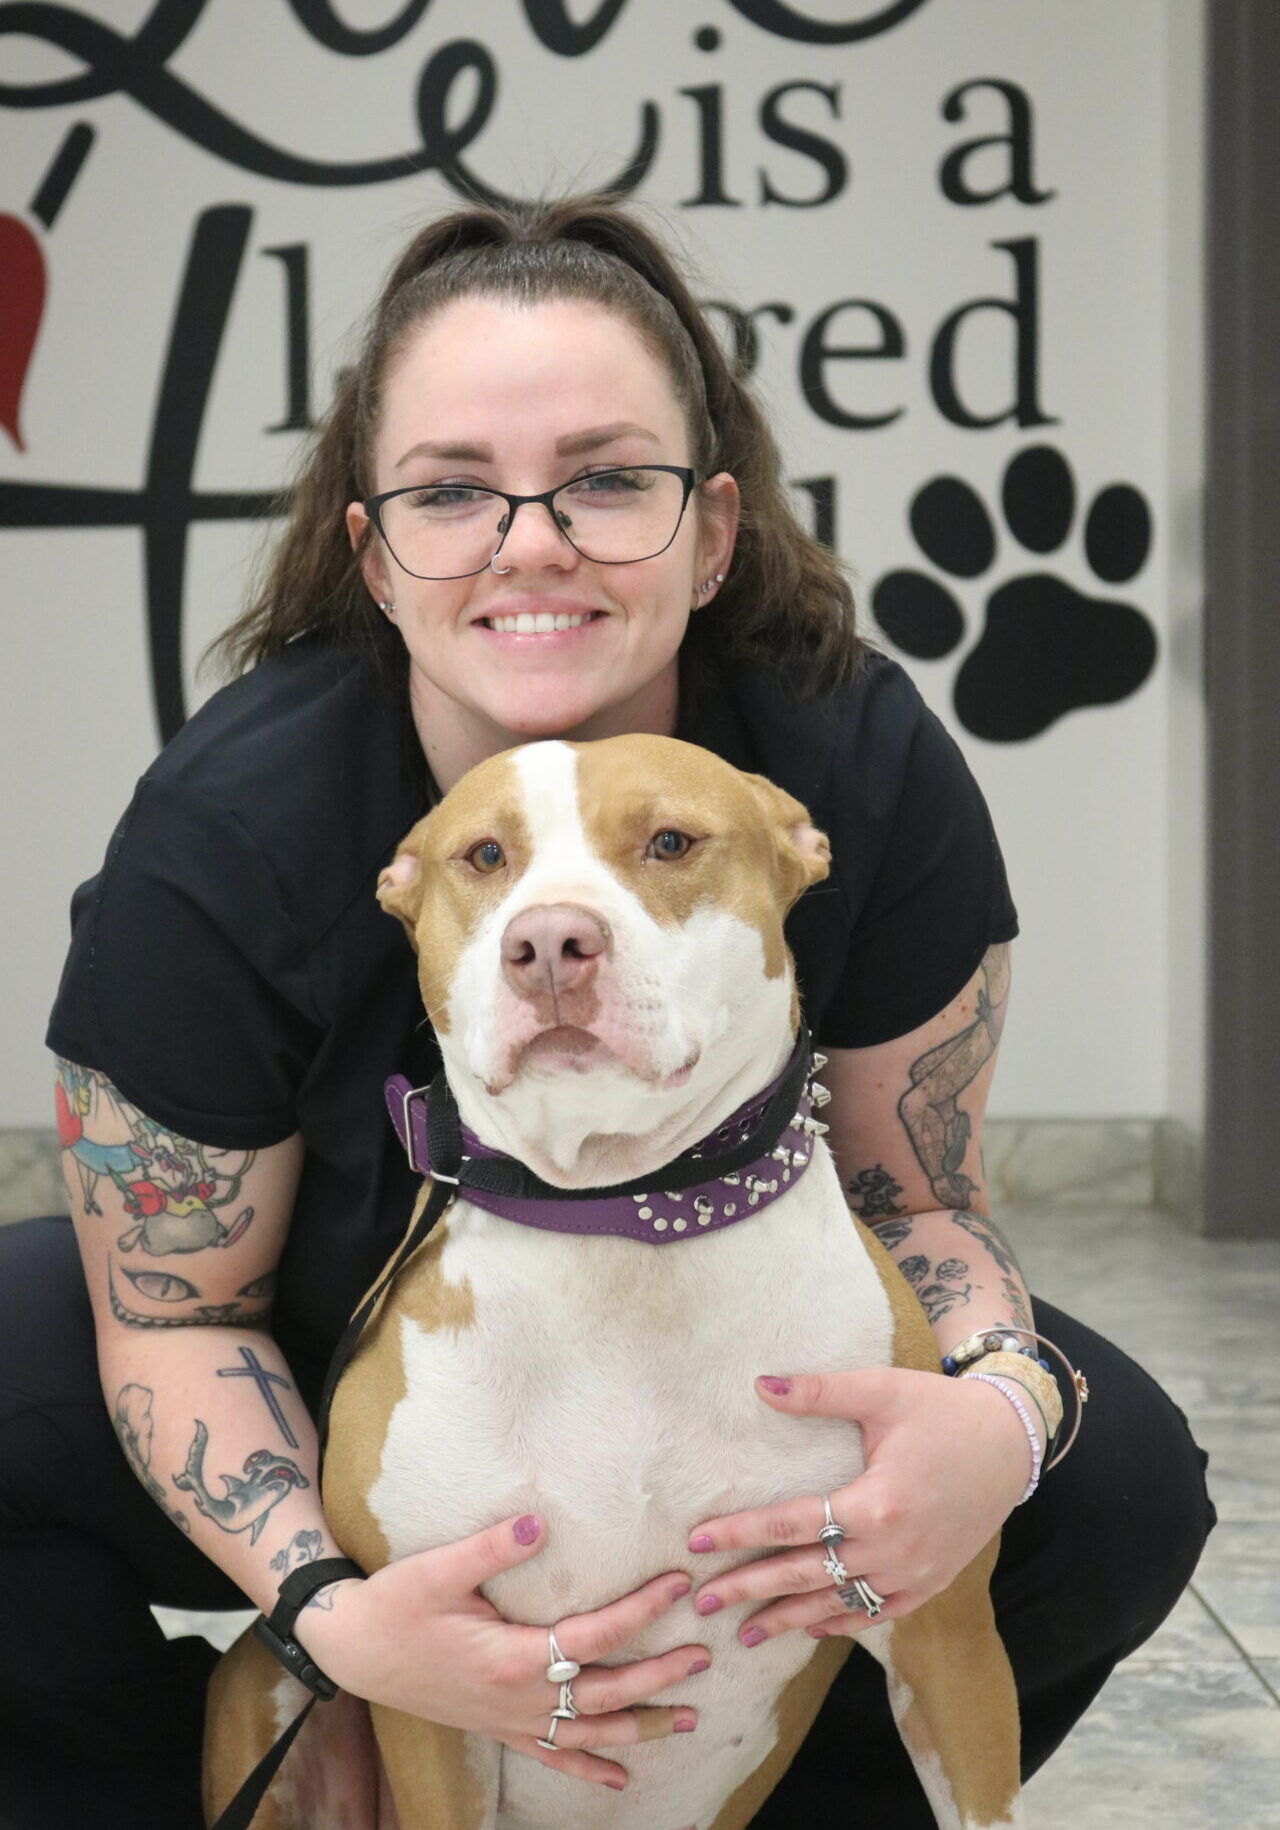 A woman with tattoos and glasses holding a dog.